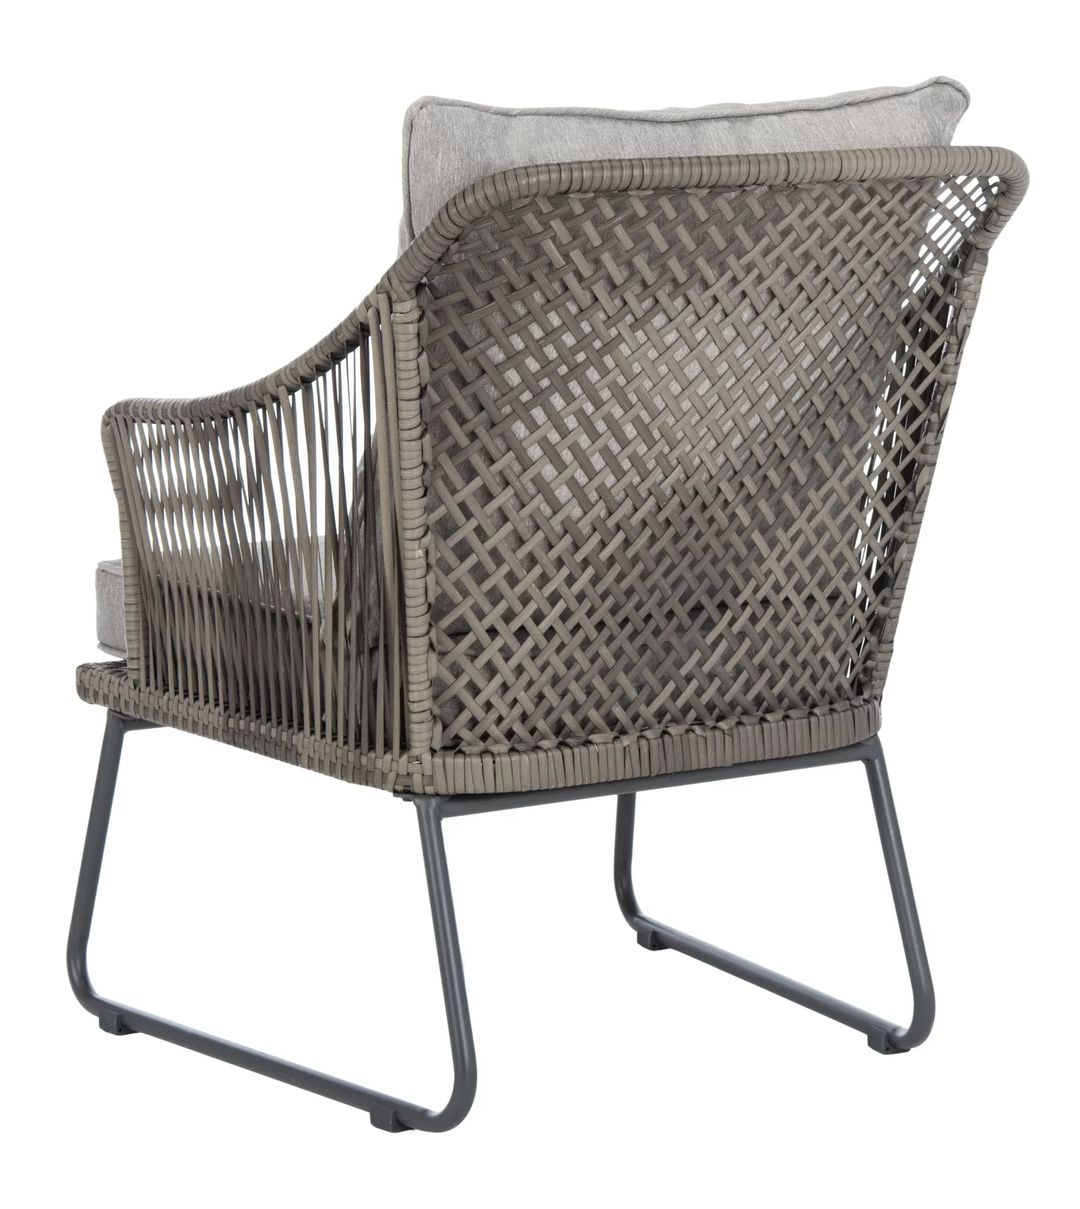 Aadhan Outdoor Patio Seating Set 2 Chairs and 1 Table Set (Grey)